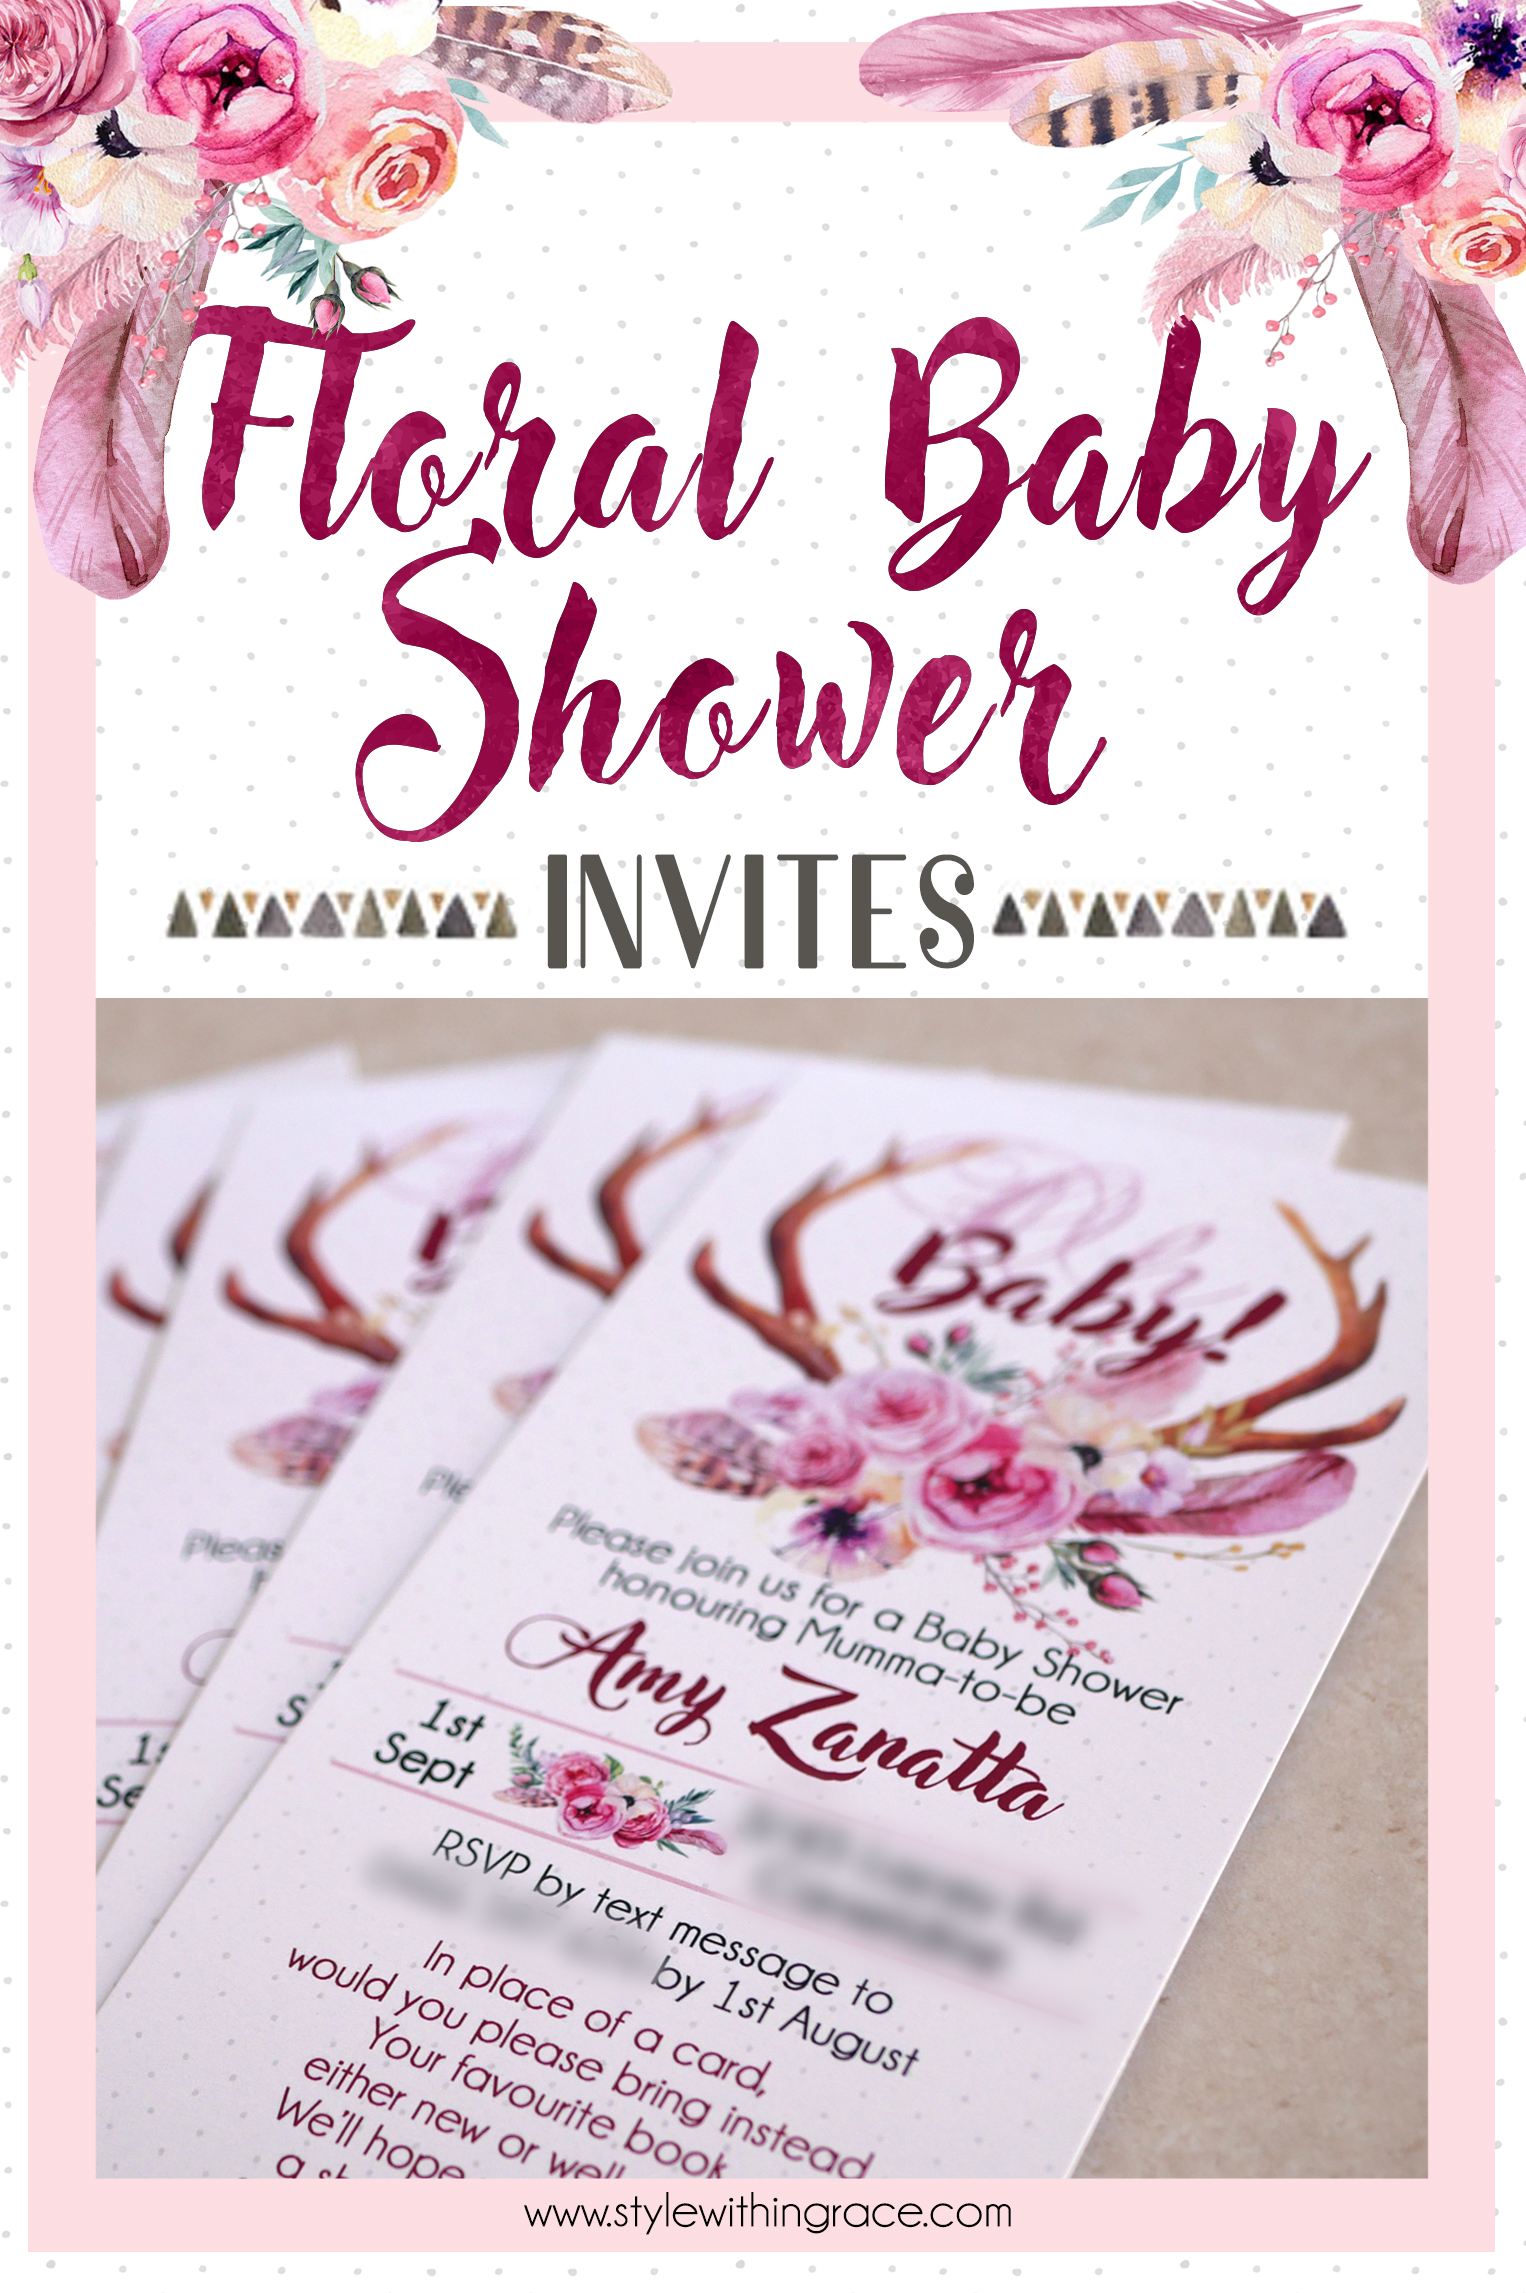 Floral Baby Shower Pinterest Graphic - Invites 02